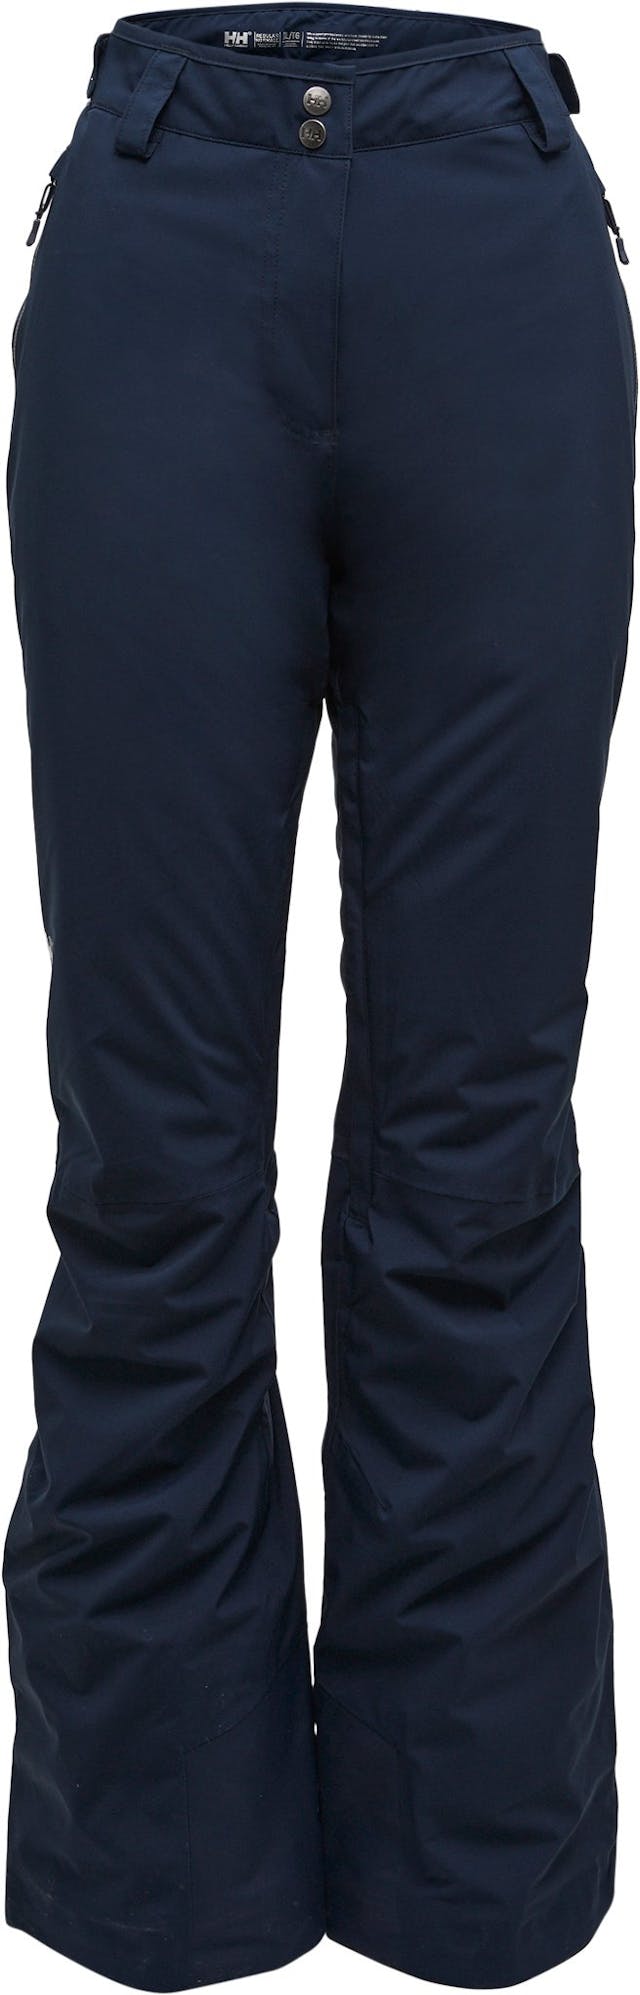 Product image for Legendary Insulated Pant - Women's